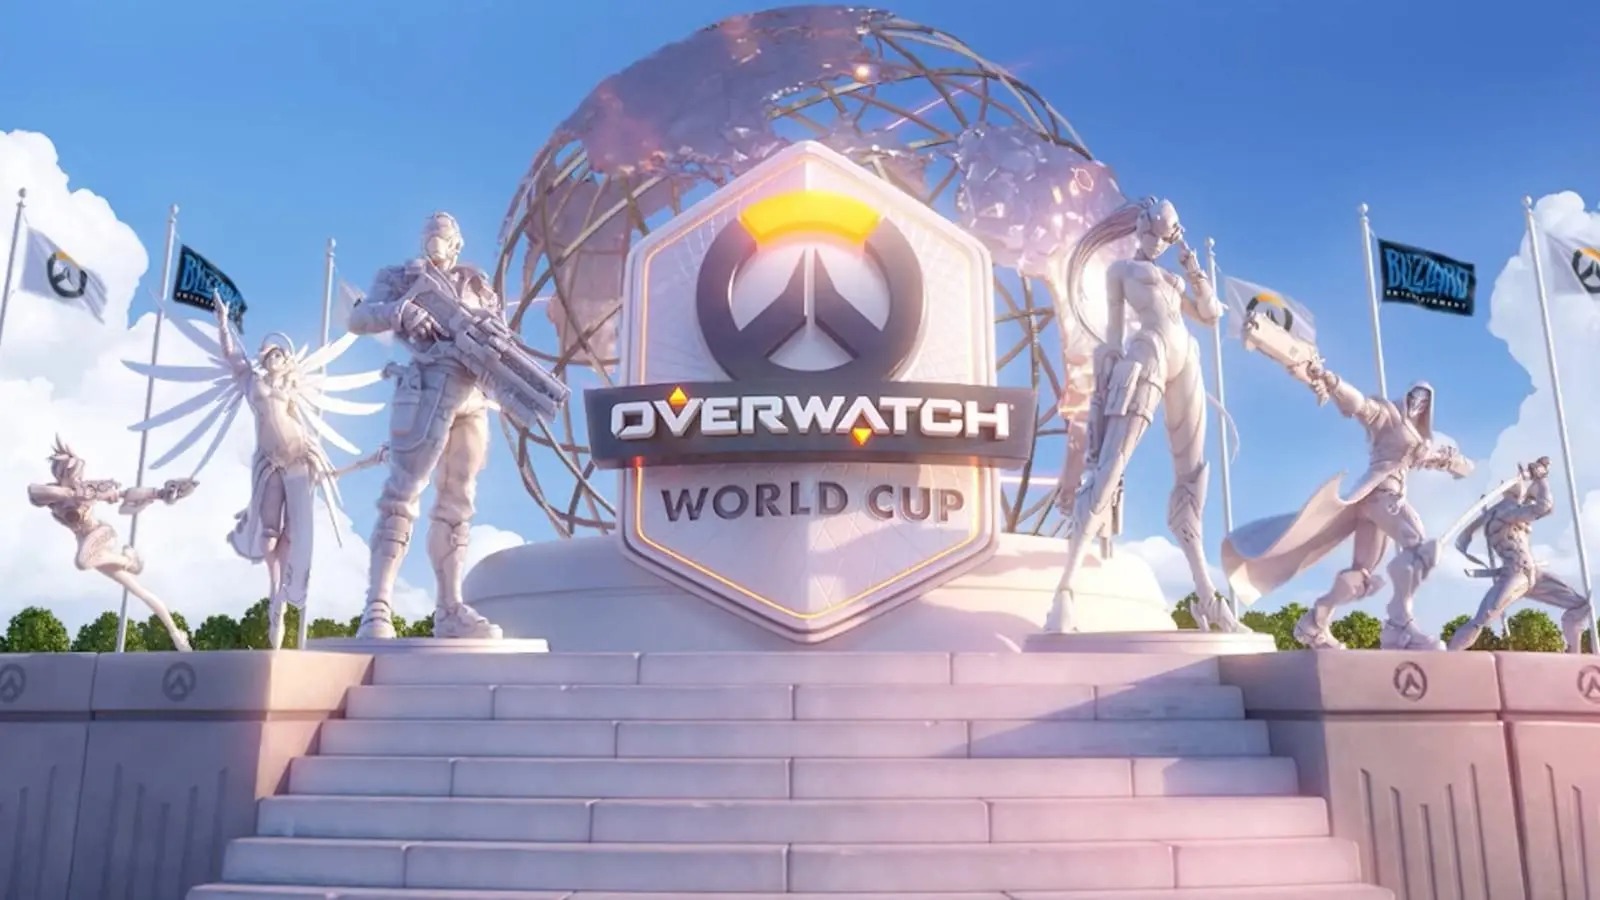 How To Watch Overwatch World Cup